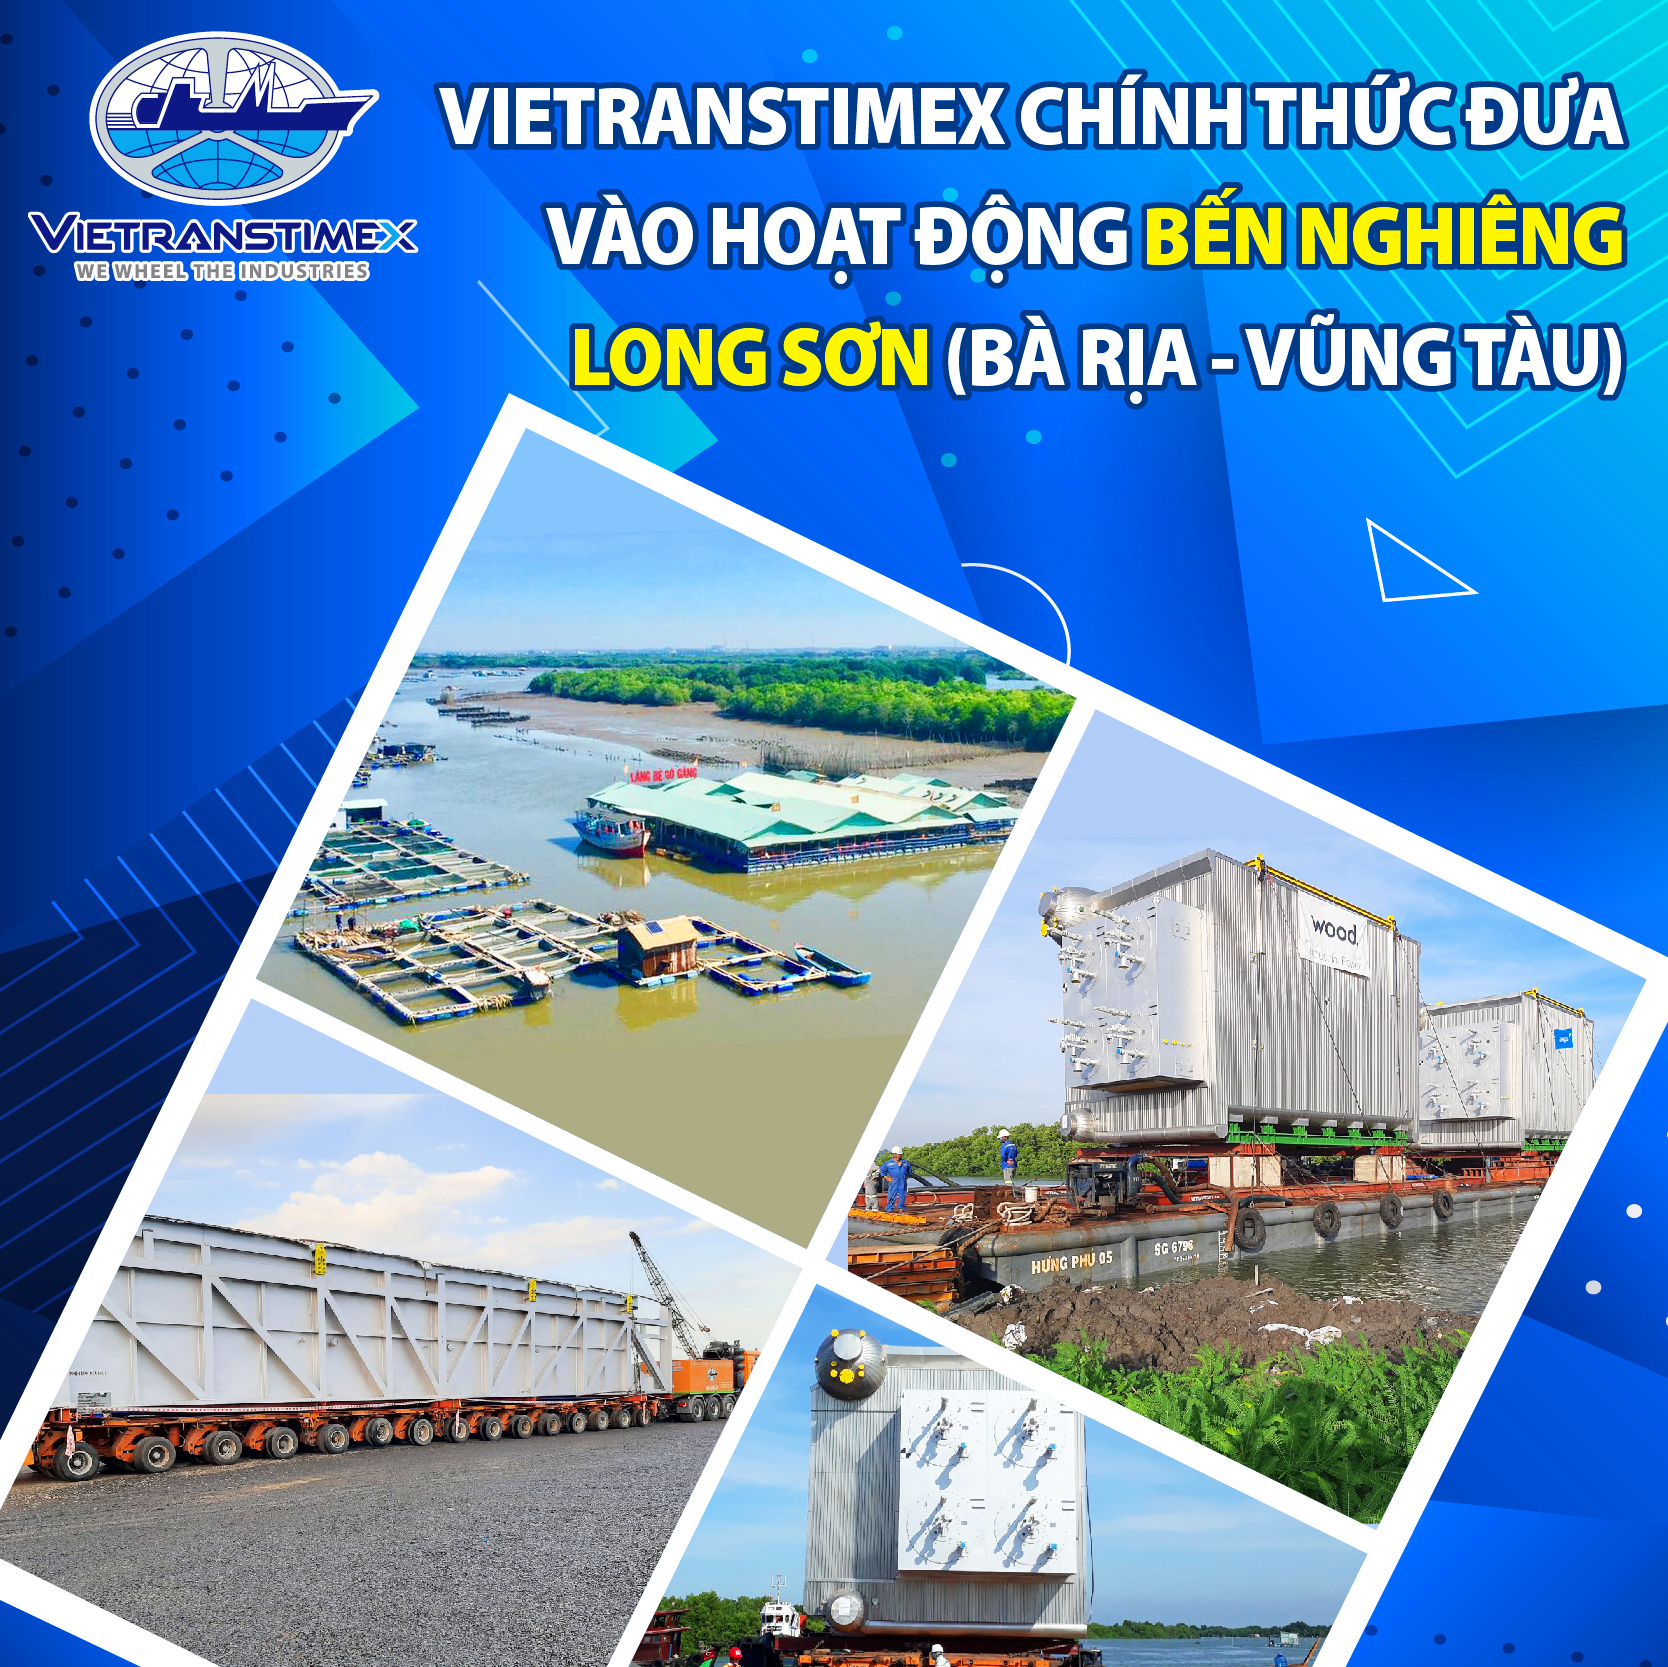 Vietranstimex Officially Put Thanh Hung Inland Waterway Port Into Operation In Long Son, Ba Ria Vung Tau